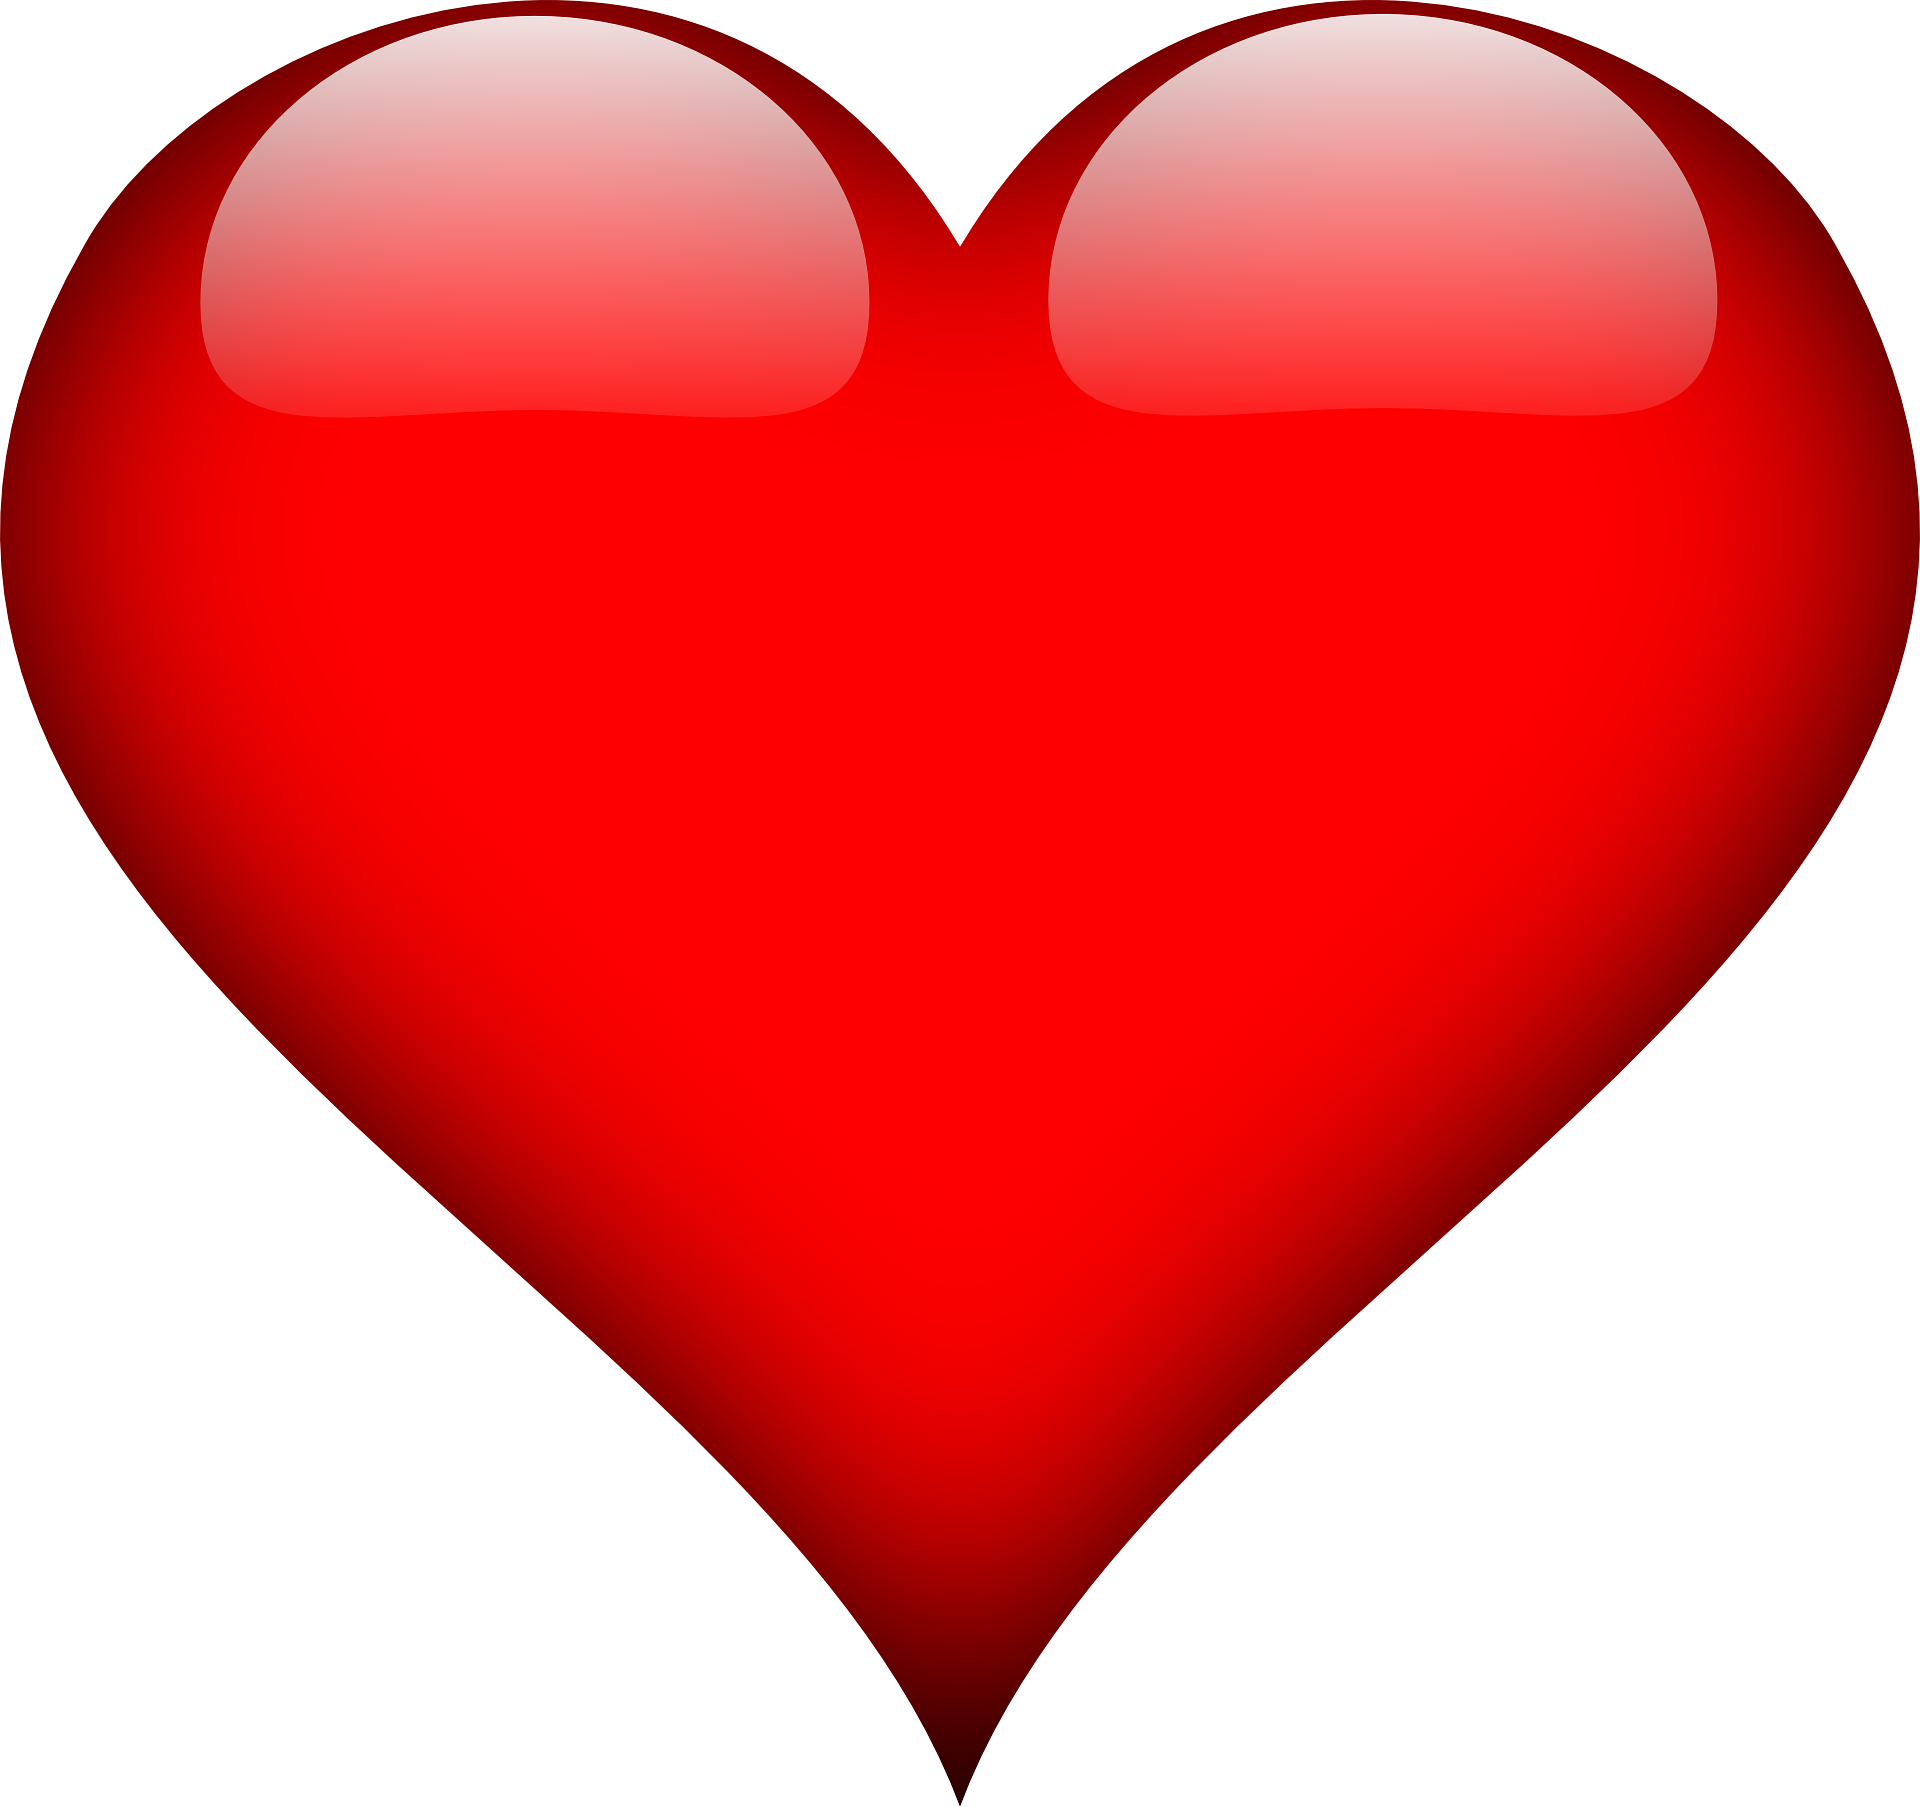 A red heart icon